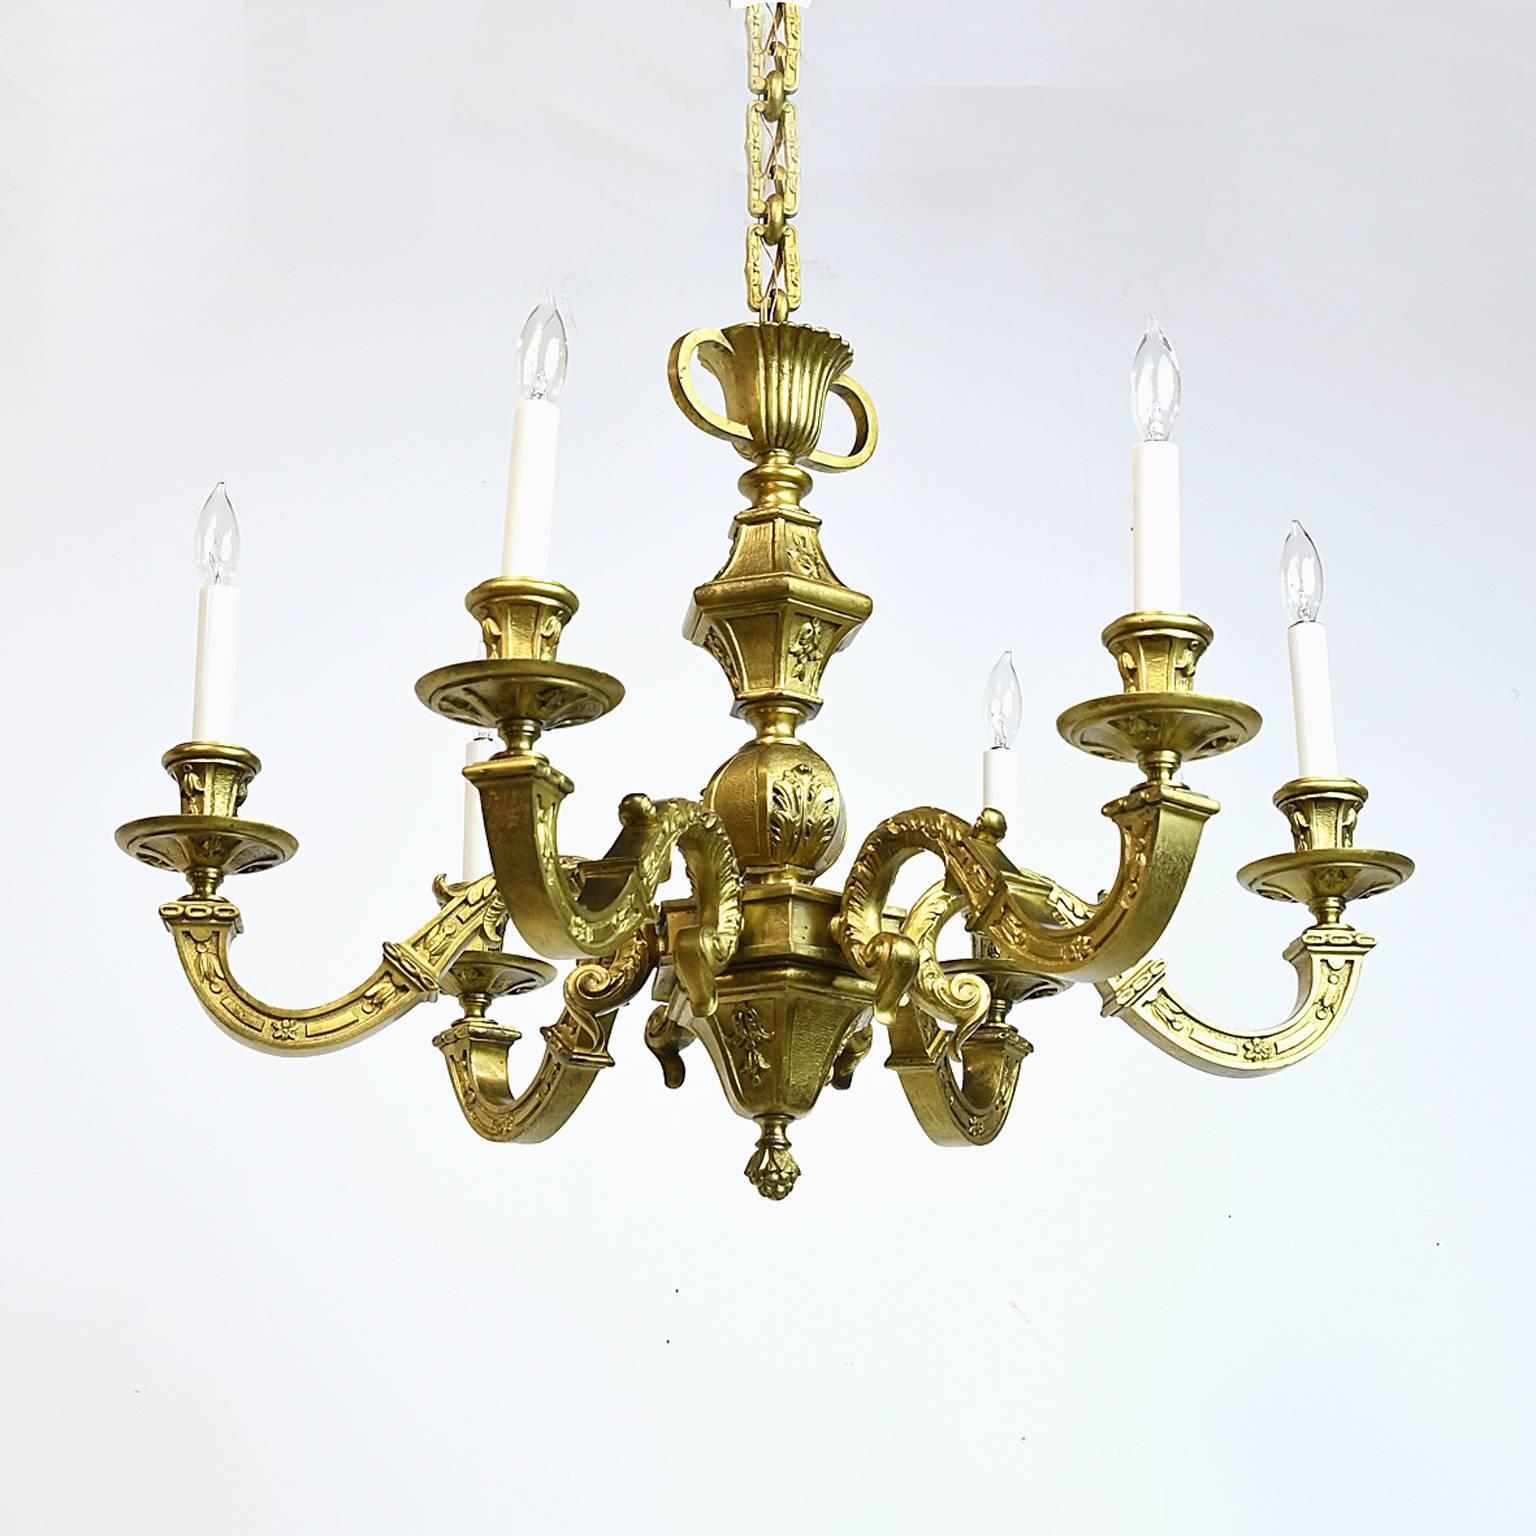 A beautiful and decorative cast bronze 6 light chandelier from the Belle Époque period with original doré or gold and gilt cream finish, from France or Belgium, circa 1900. Designed for electric use, it has been re-wired to American standards, using